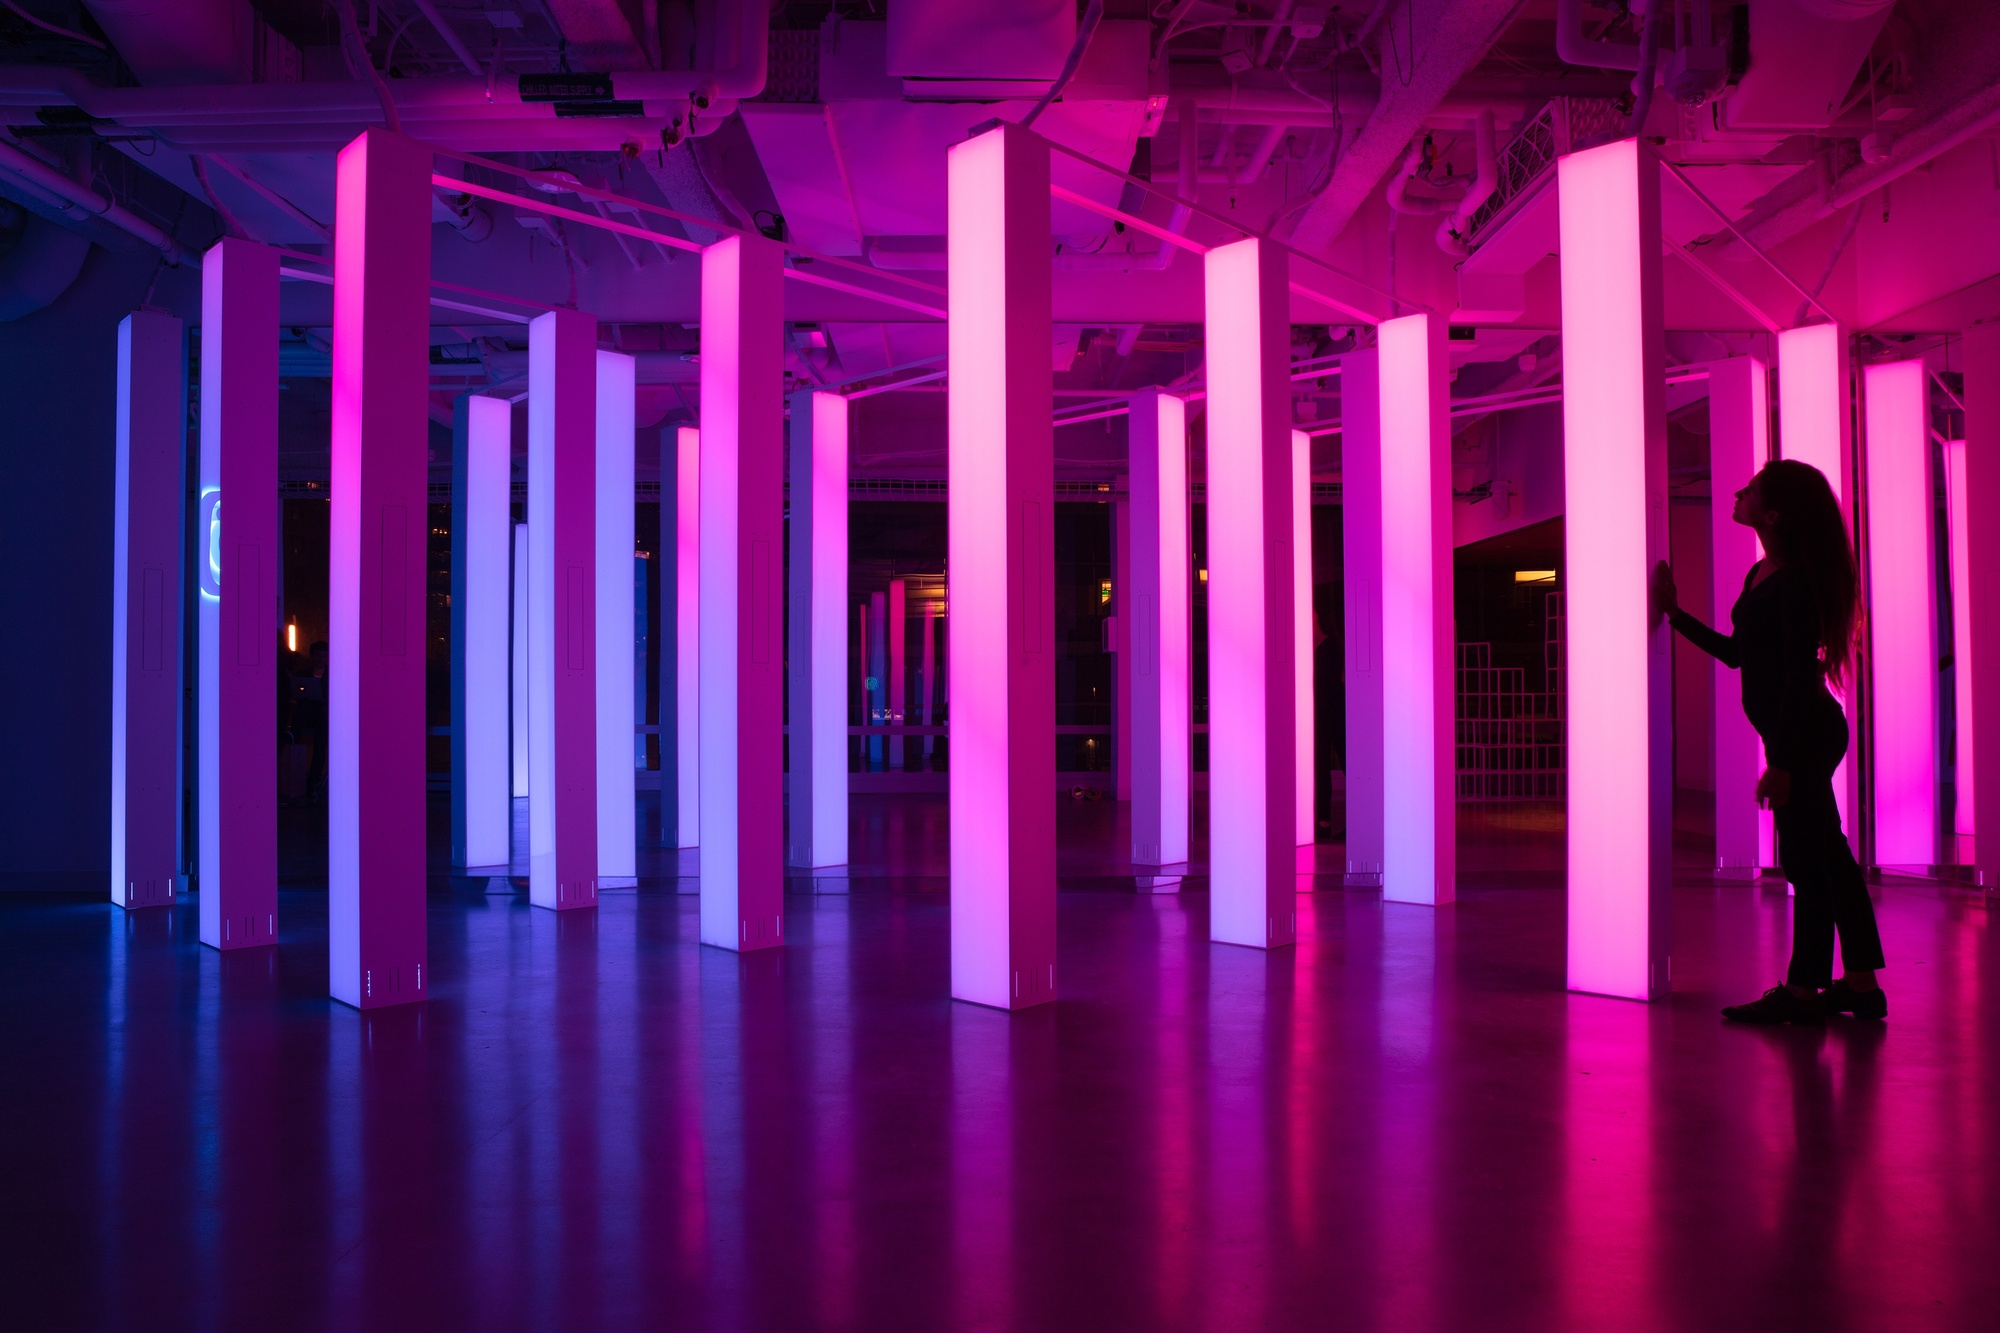 Wide angle of women standing next to columns with blue to pink gradient